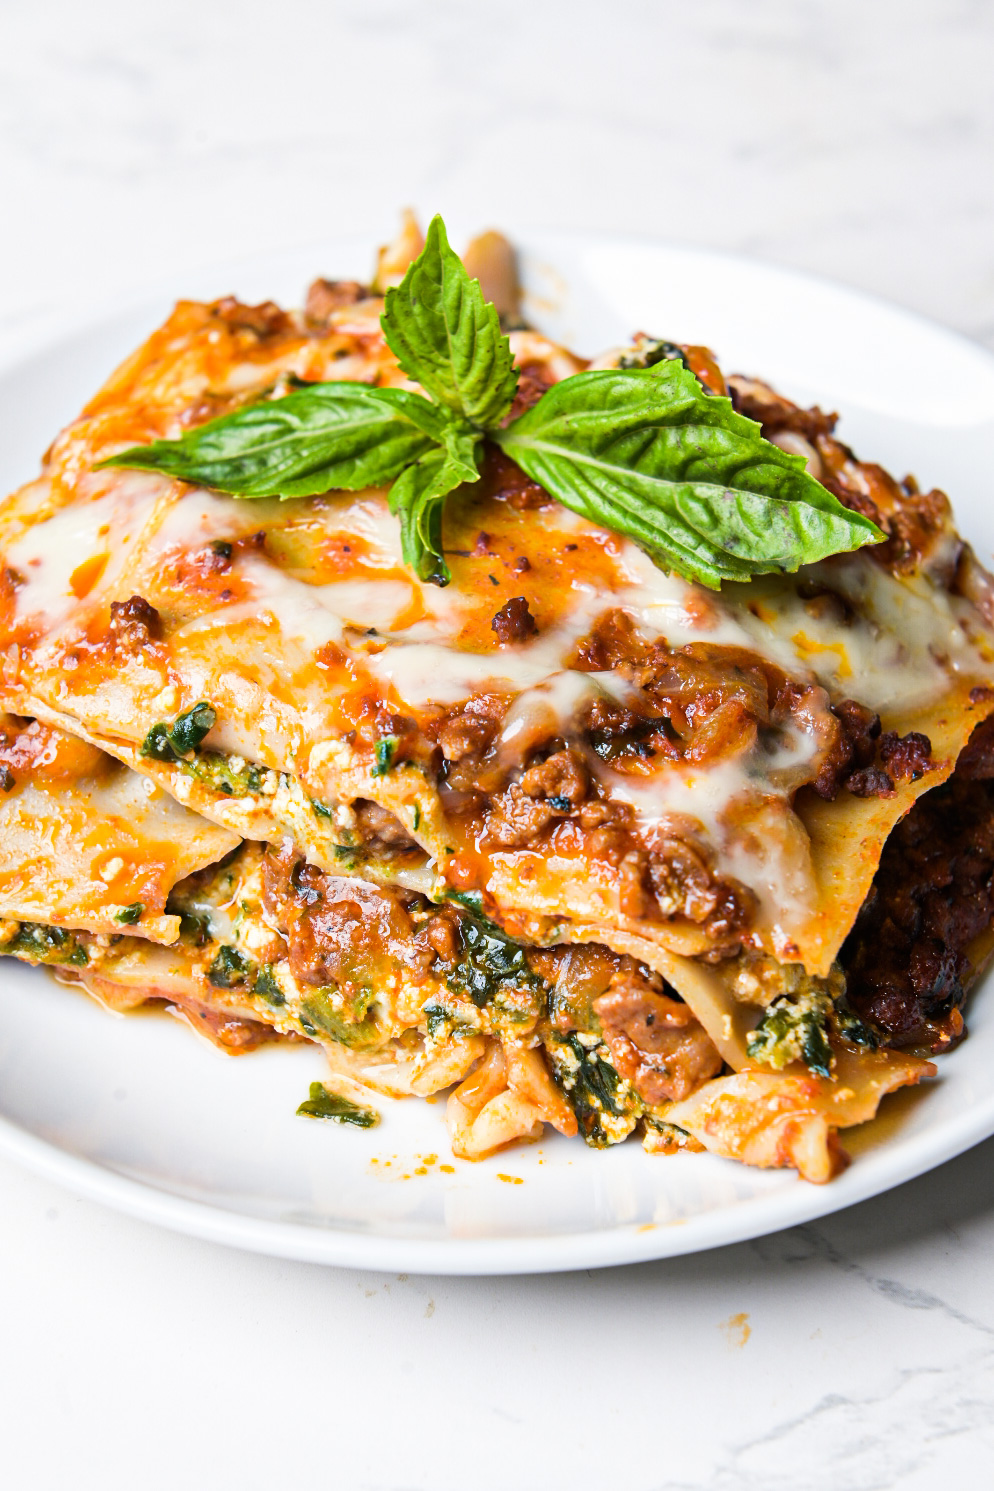 A slice of gluten-free lasagna with meat sauce